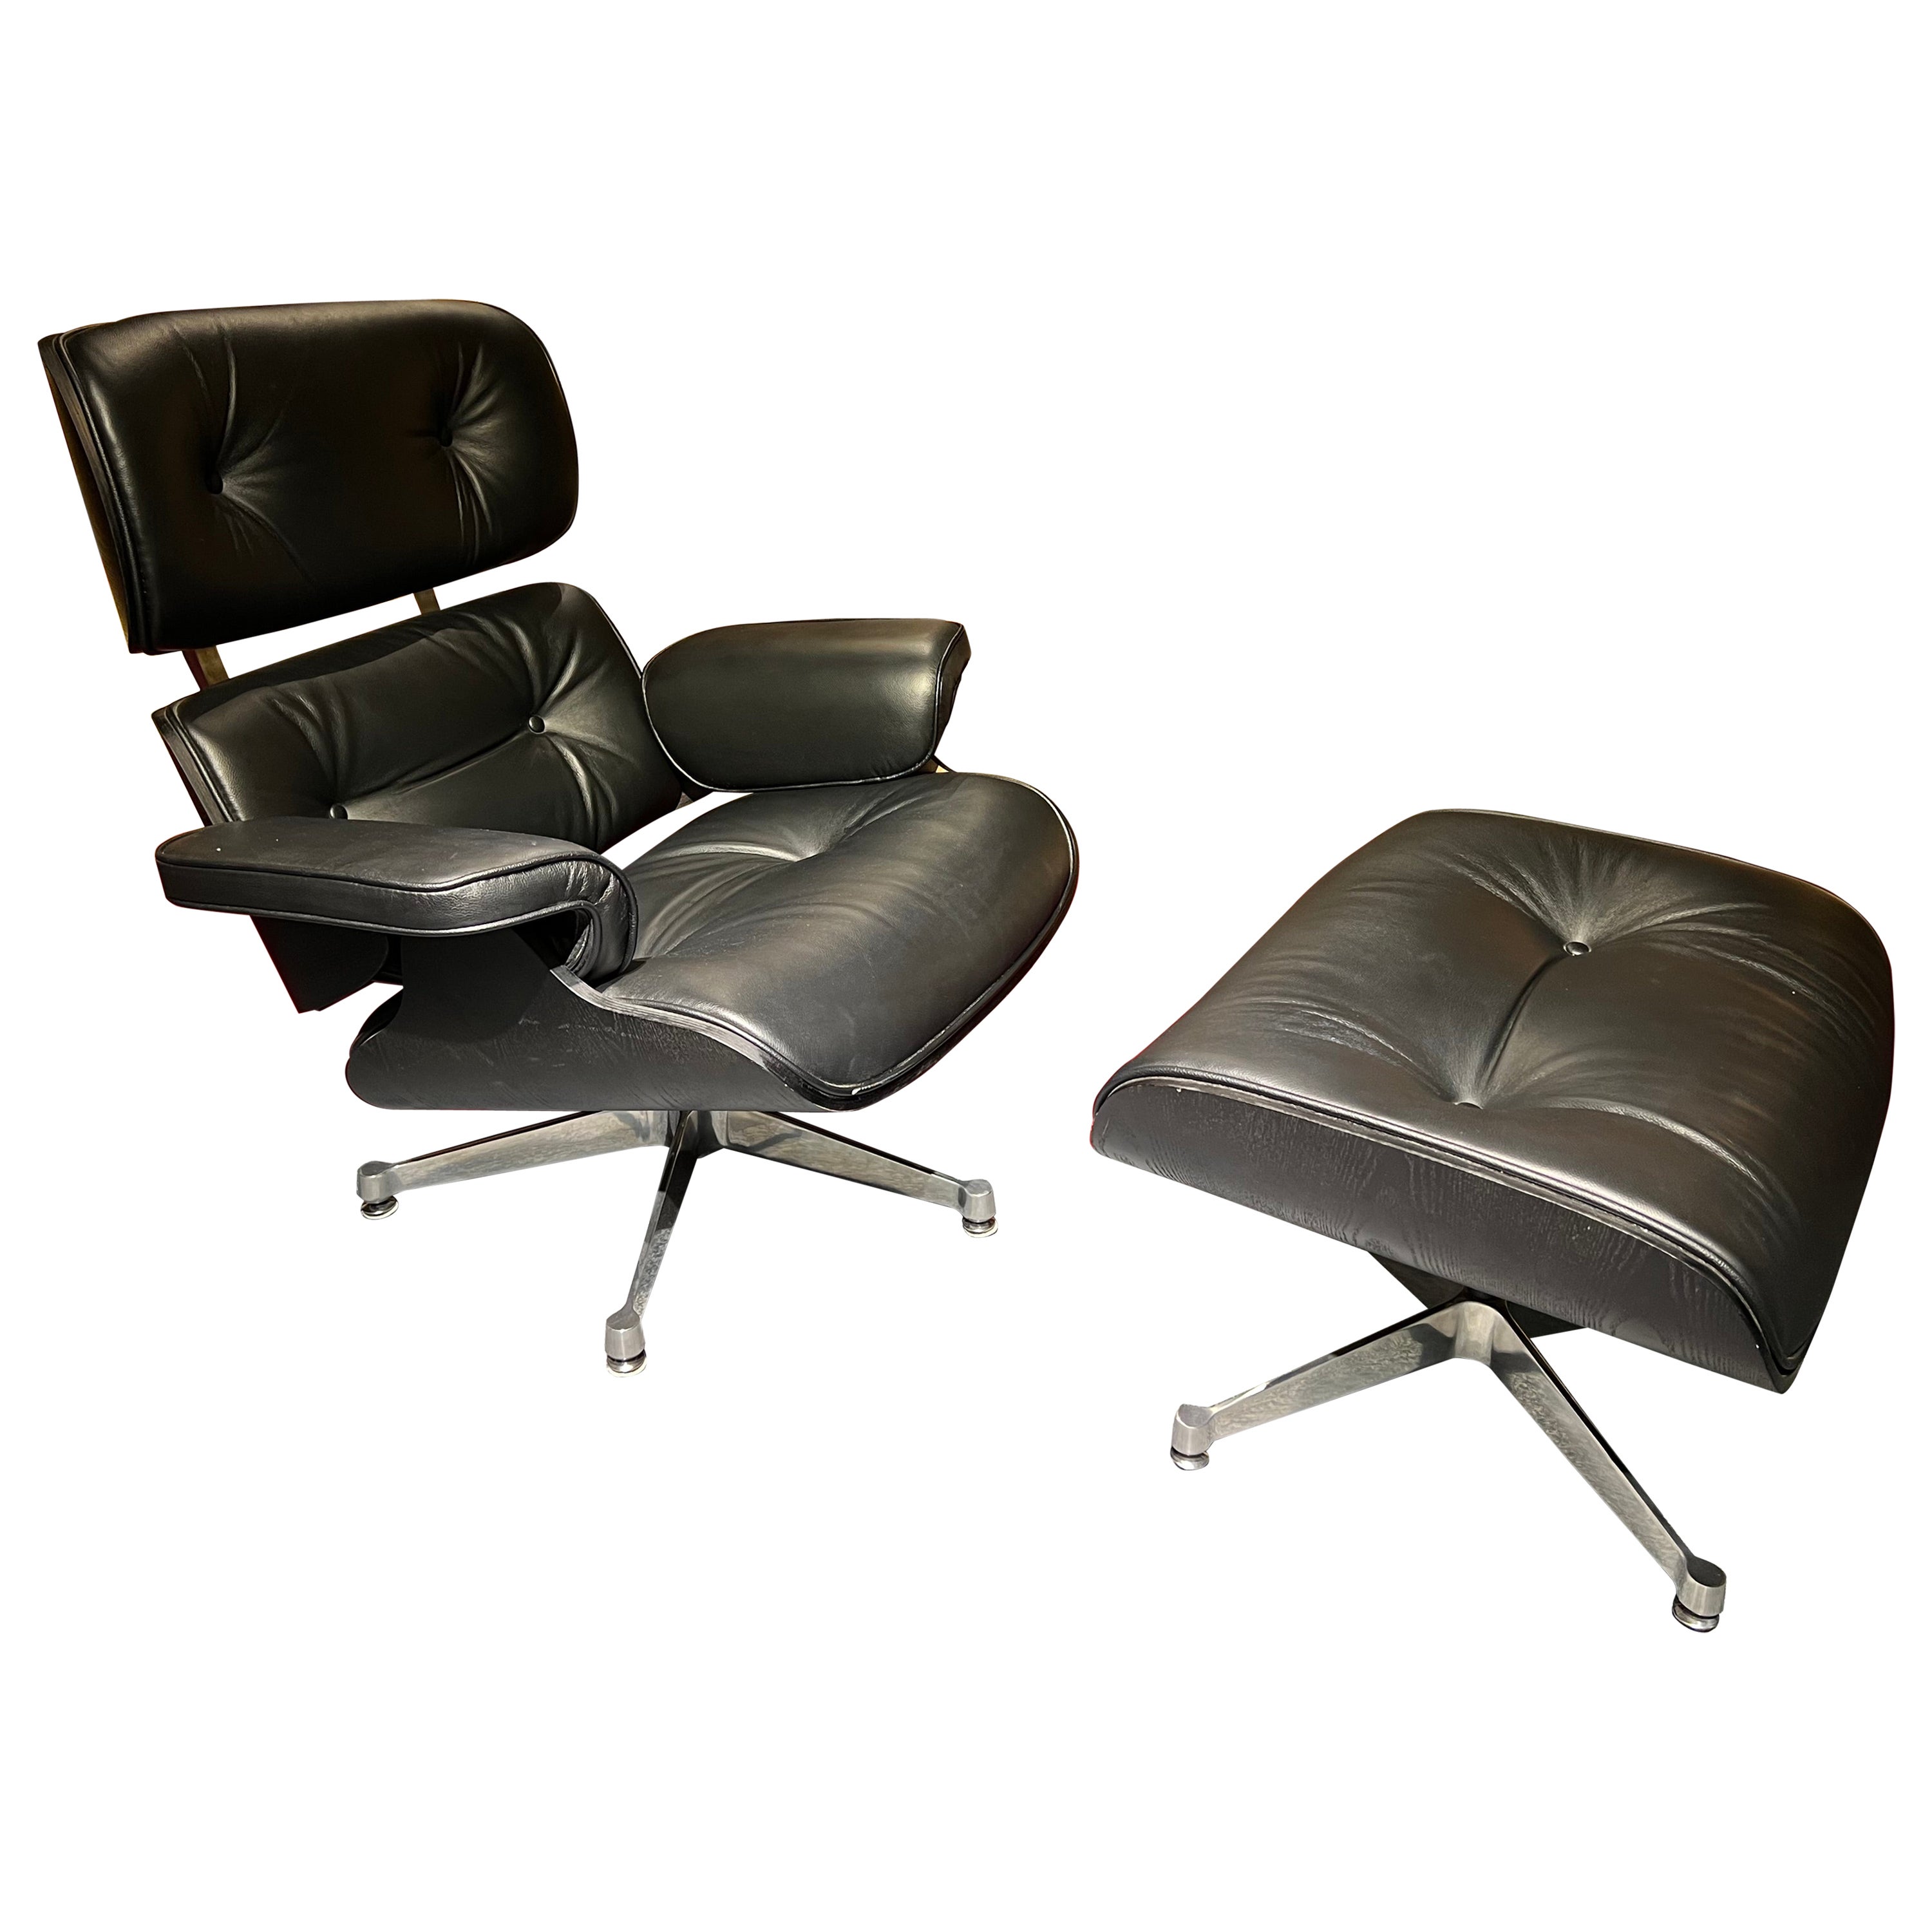 Charles Eames Style Lounge Chair with Ottoman Real Leather Black